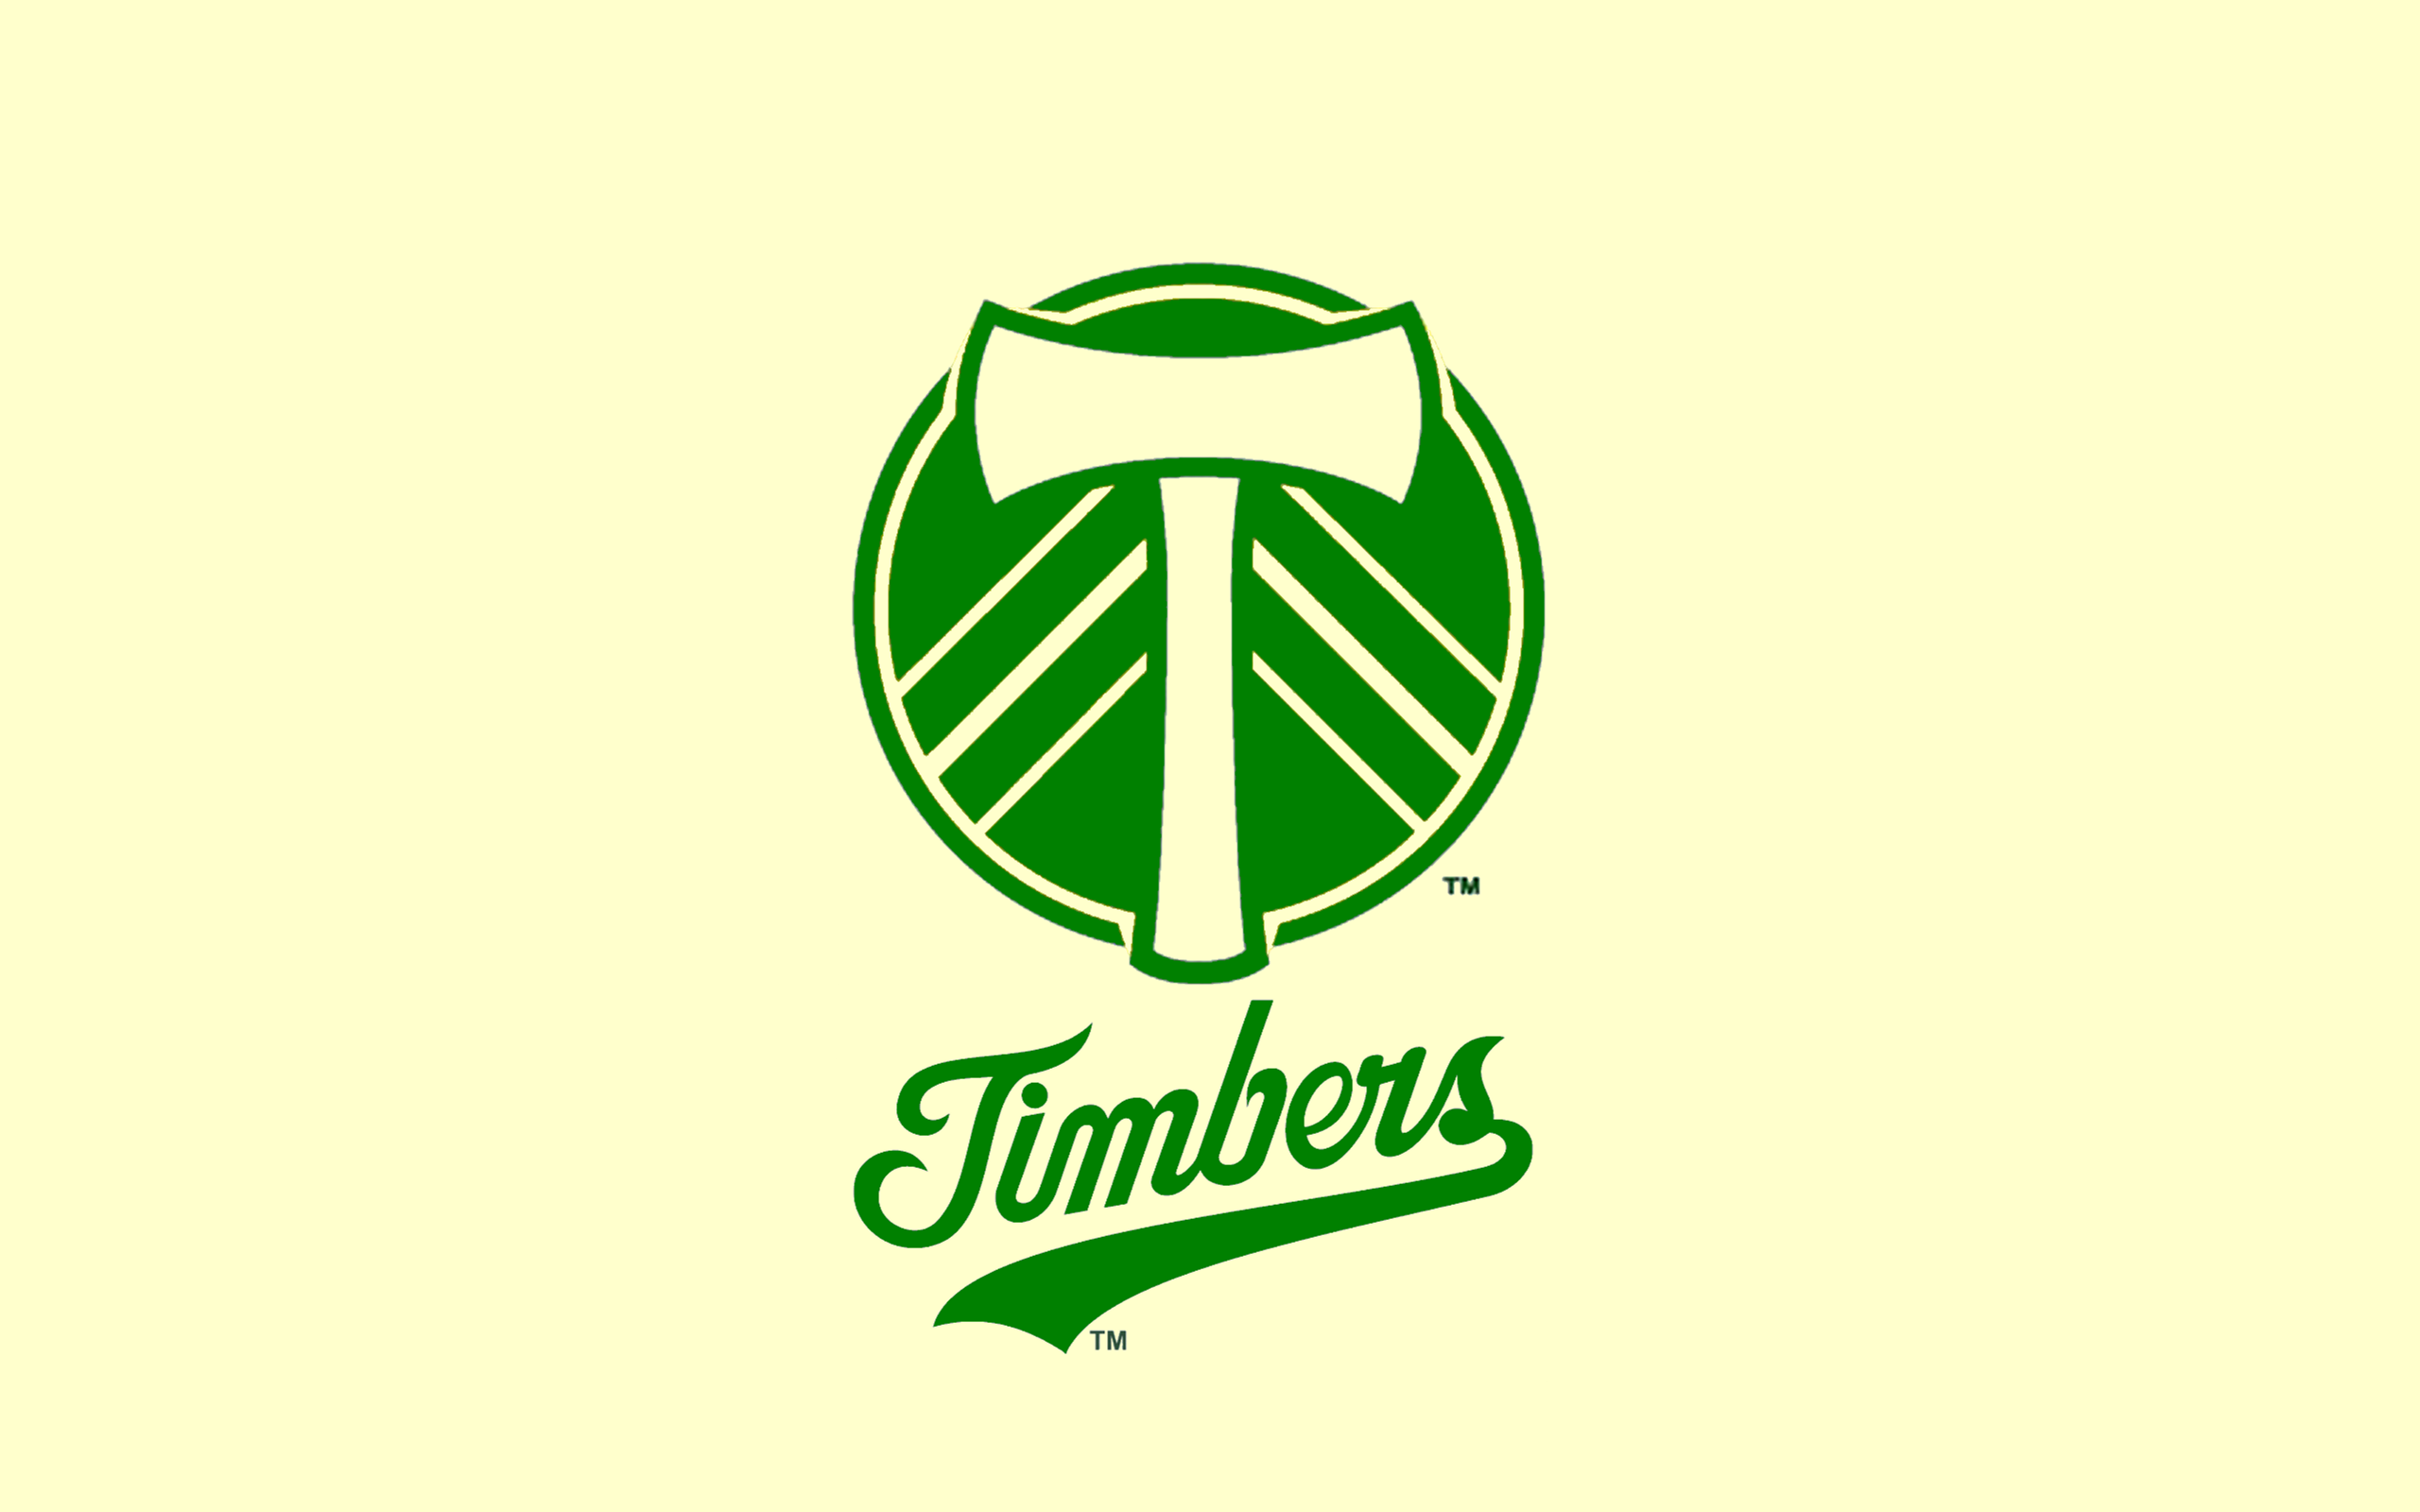 Pin by Georgeanna Alemany on RCTID Pinterest